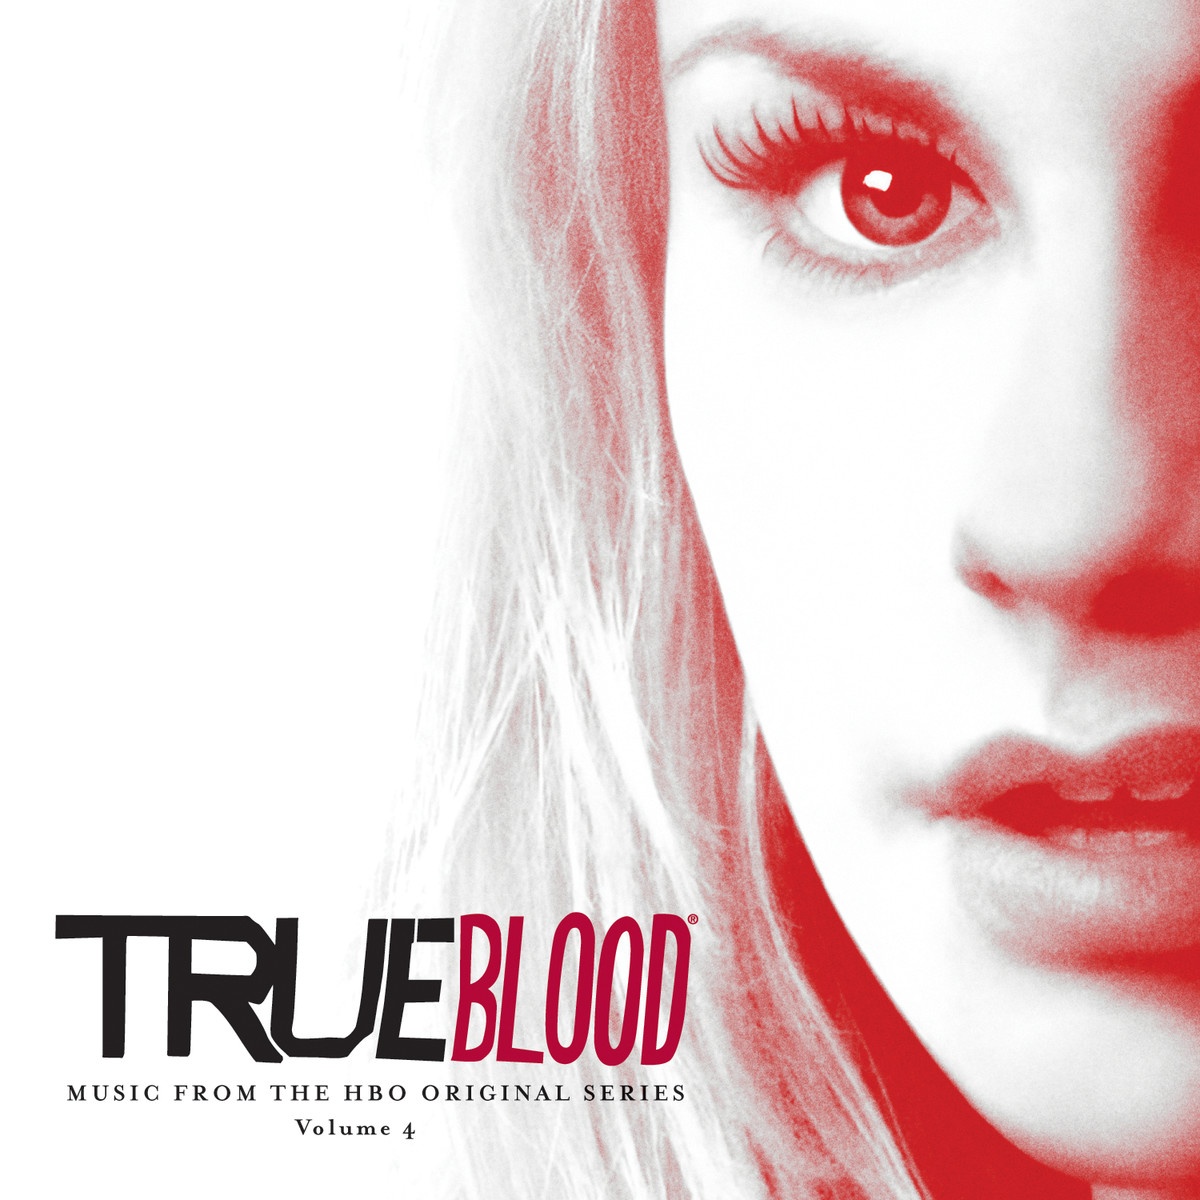 True Blood (Music From the HBO Original Series), Vol. 4